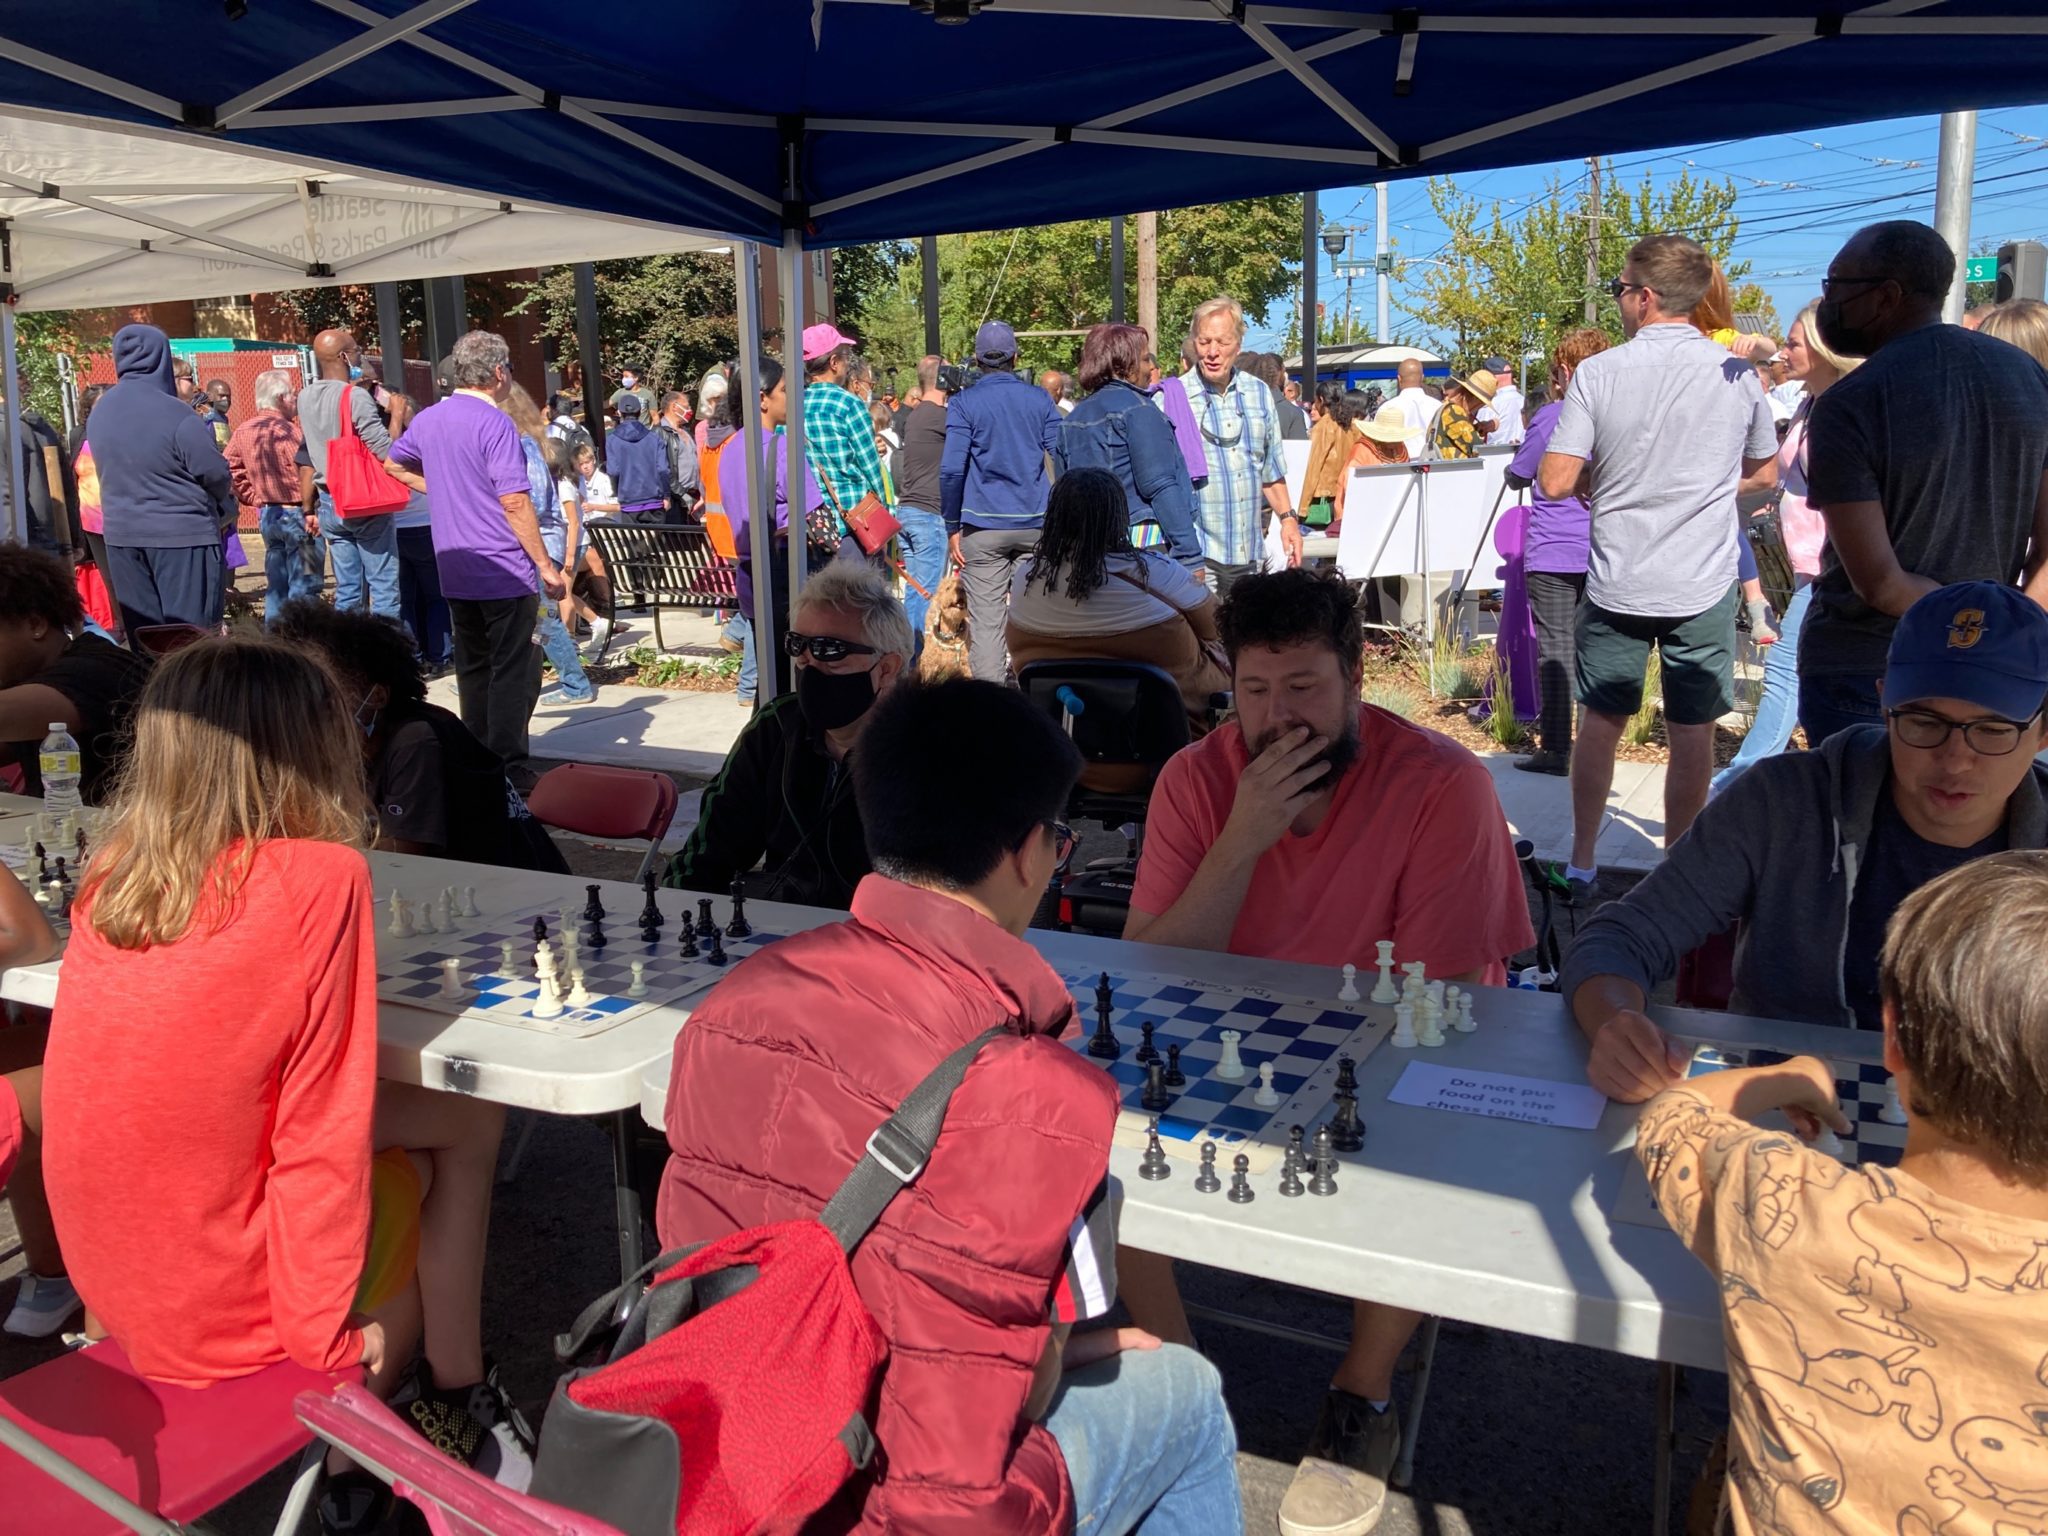 Kids and adults play the first games of chess at the newly opened Detective Cookie Chess Park in Rainier Beach. A row people playing chess at a table is in the foreground, with a crowd of people attending the celebration standing in the background.